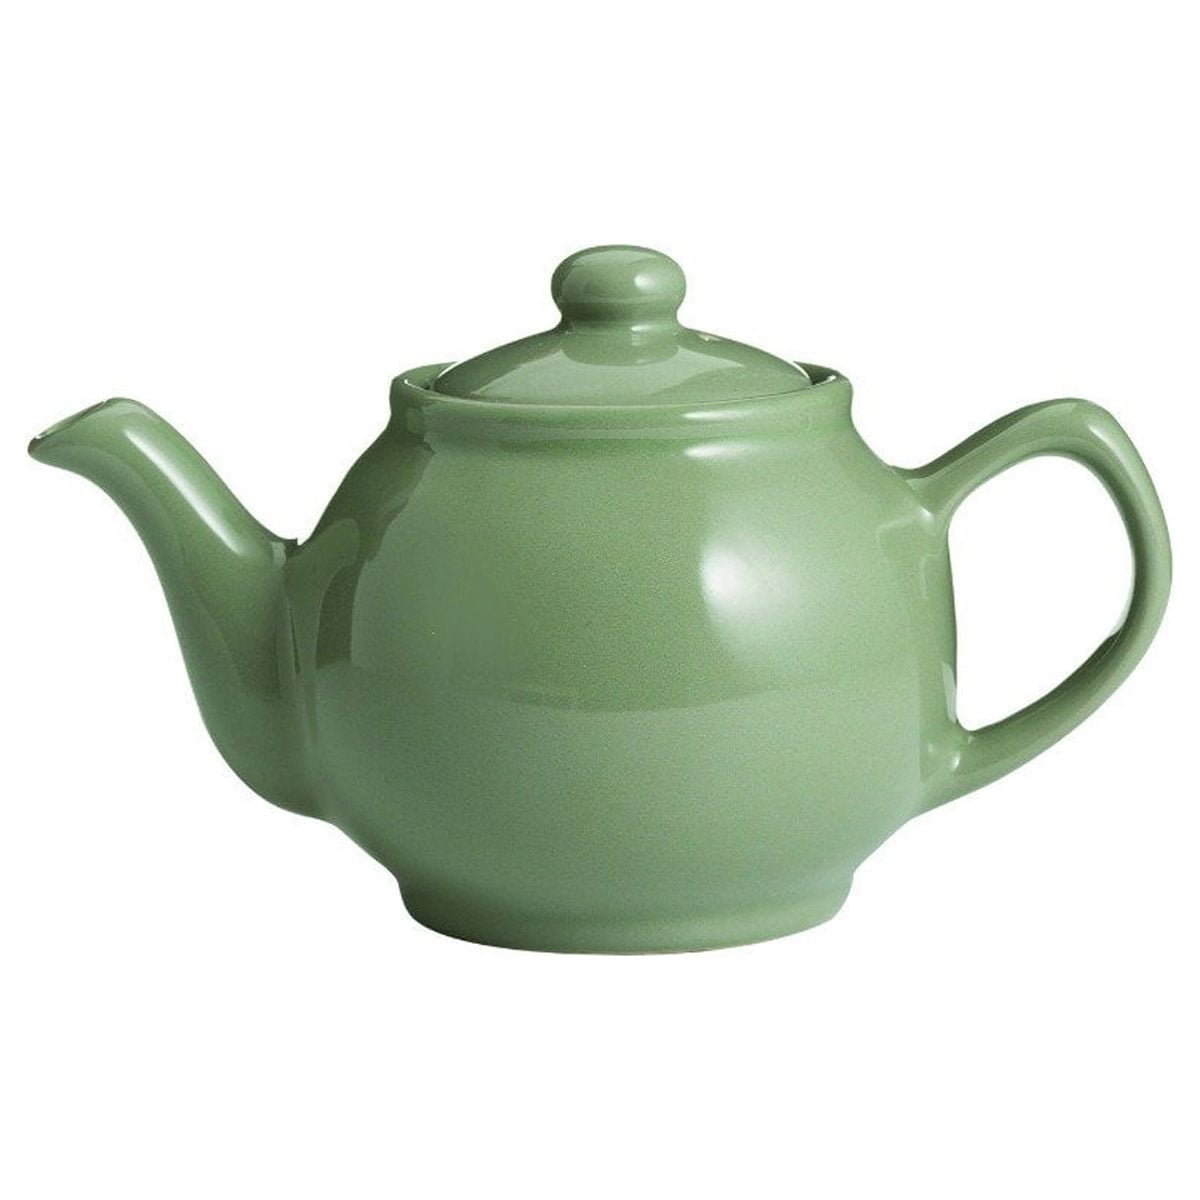 Original Plastic Teapot, Double Wall Plastic Teapot, No Tether, 16 Ounce,  Forest Green